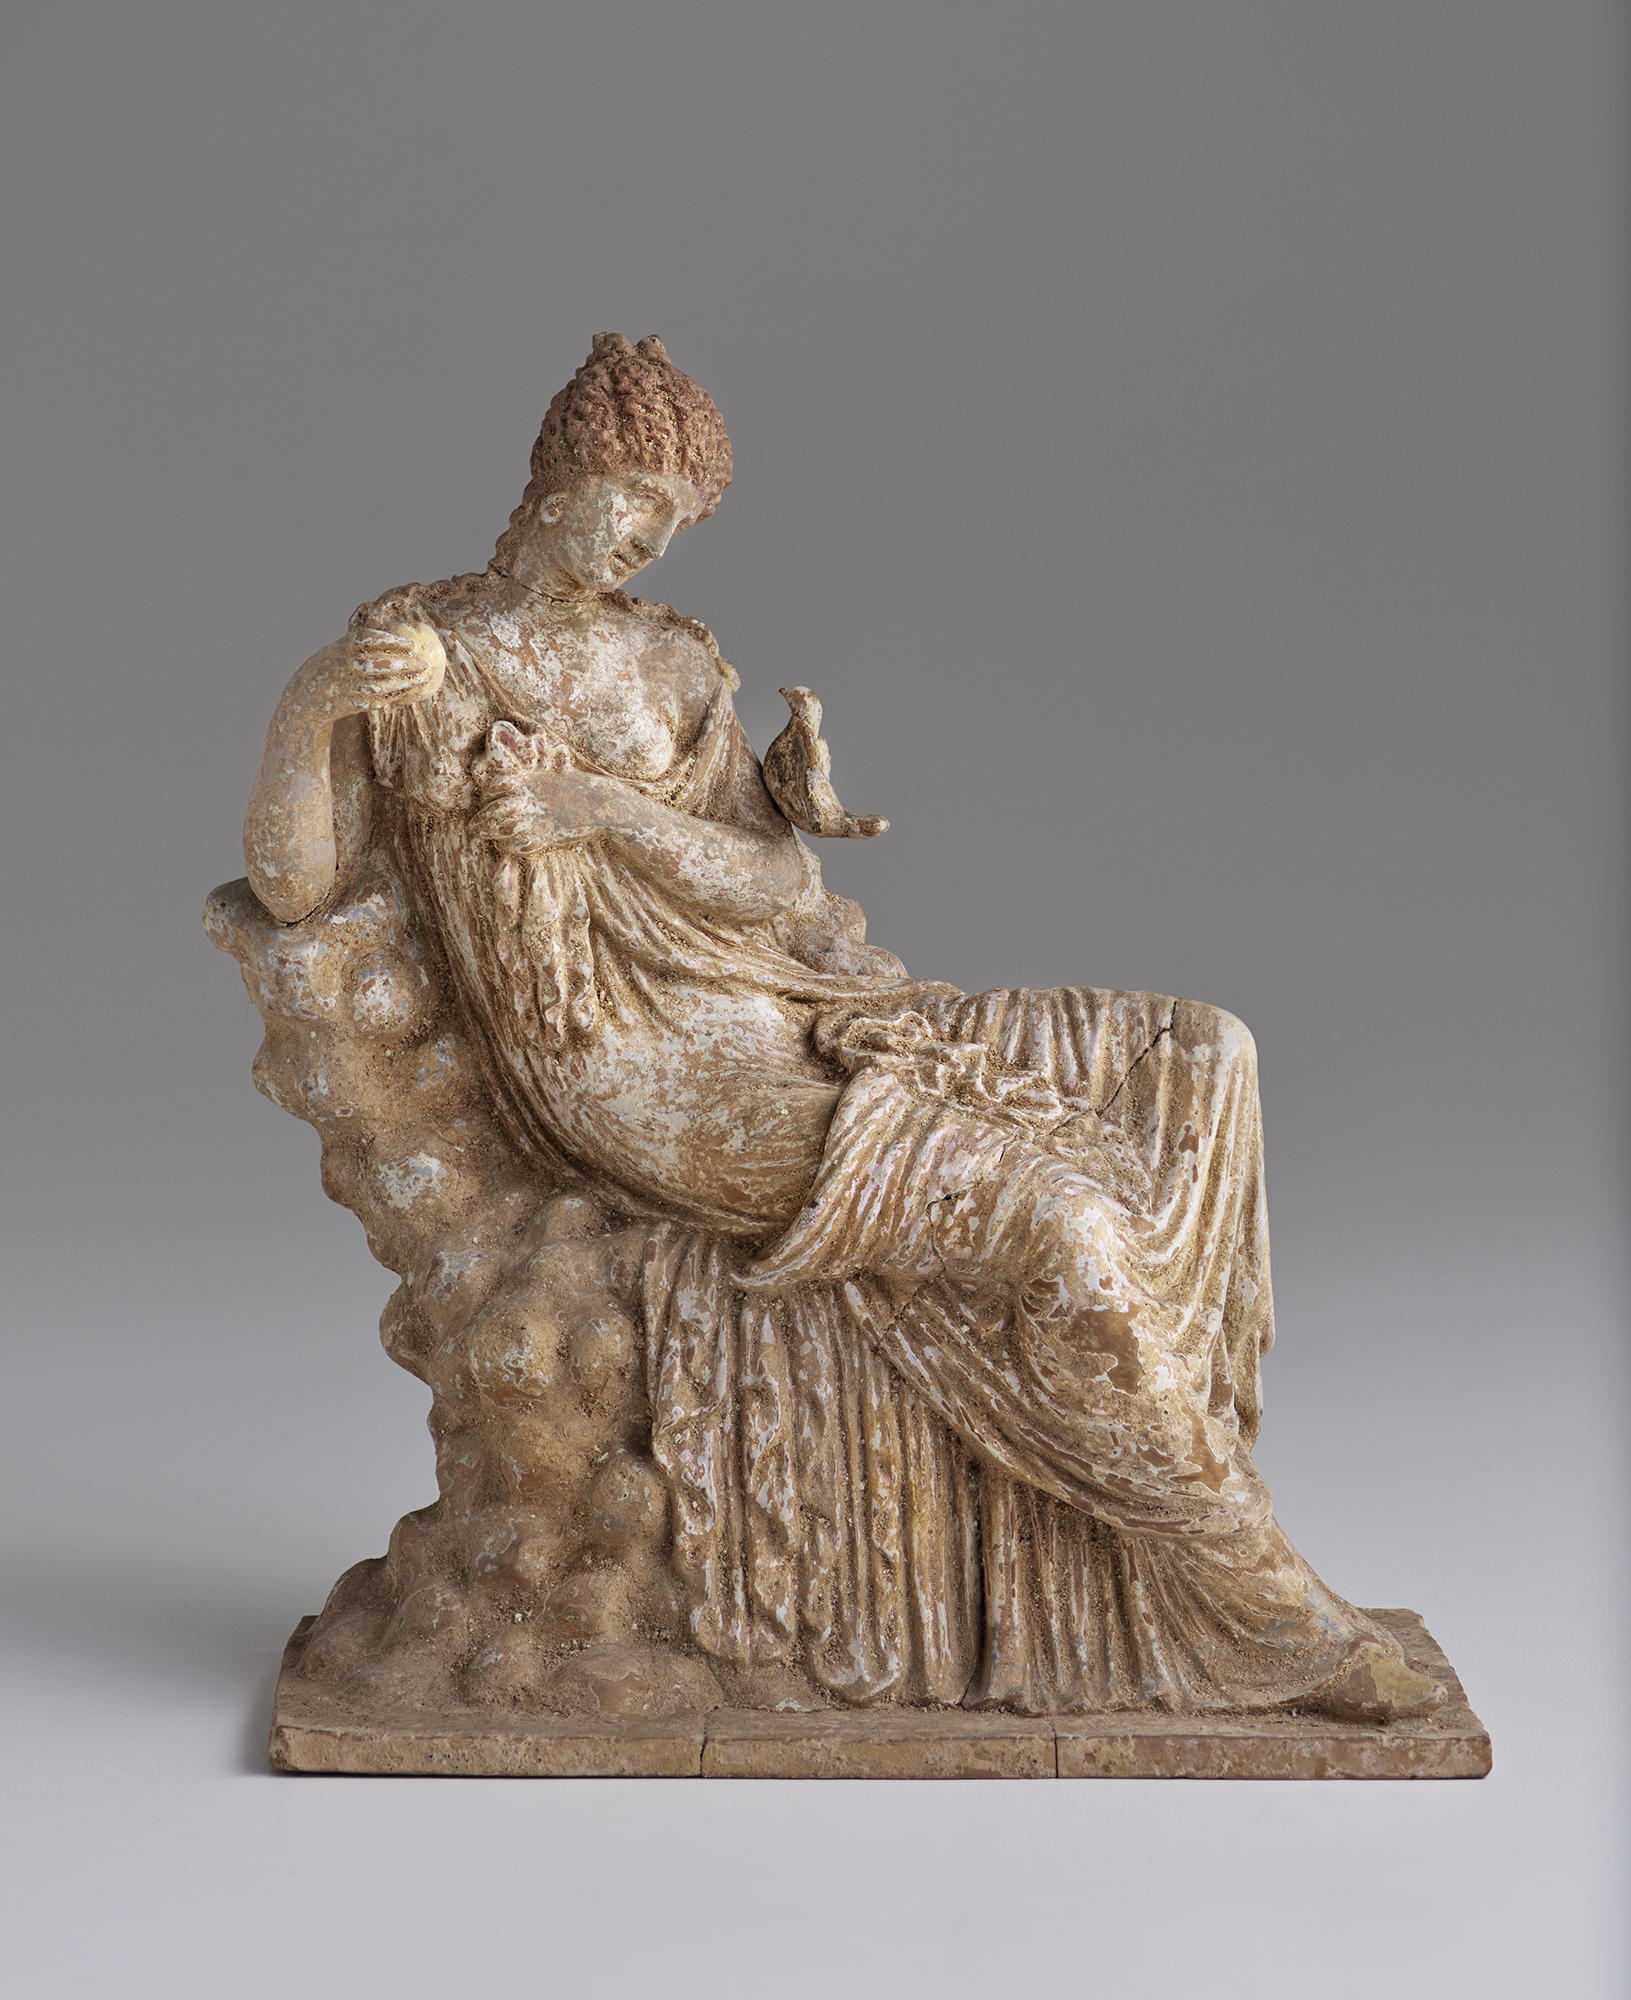 William Amory Gardner purchased this replica of an Ancient Greek original, Seated Woman, 19th century, for his aunt, Isabella